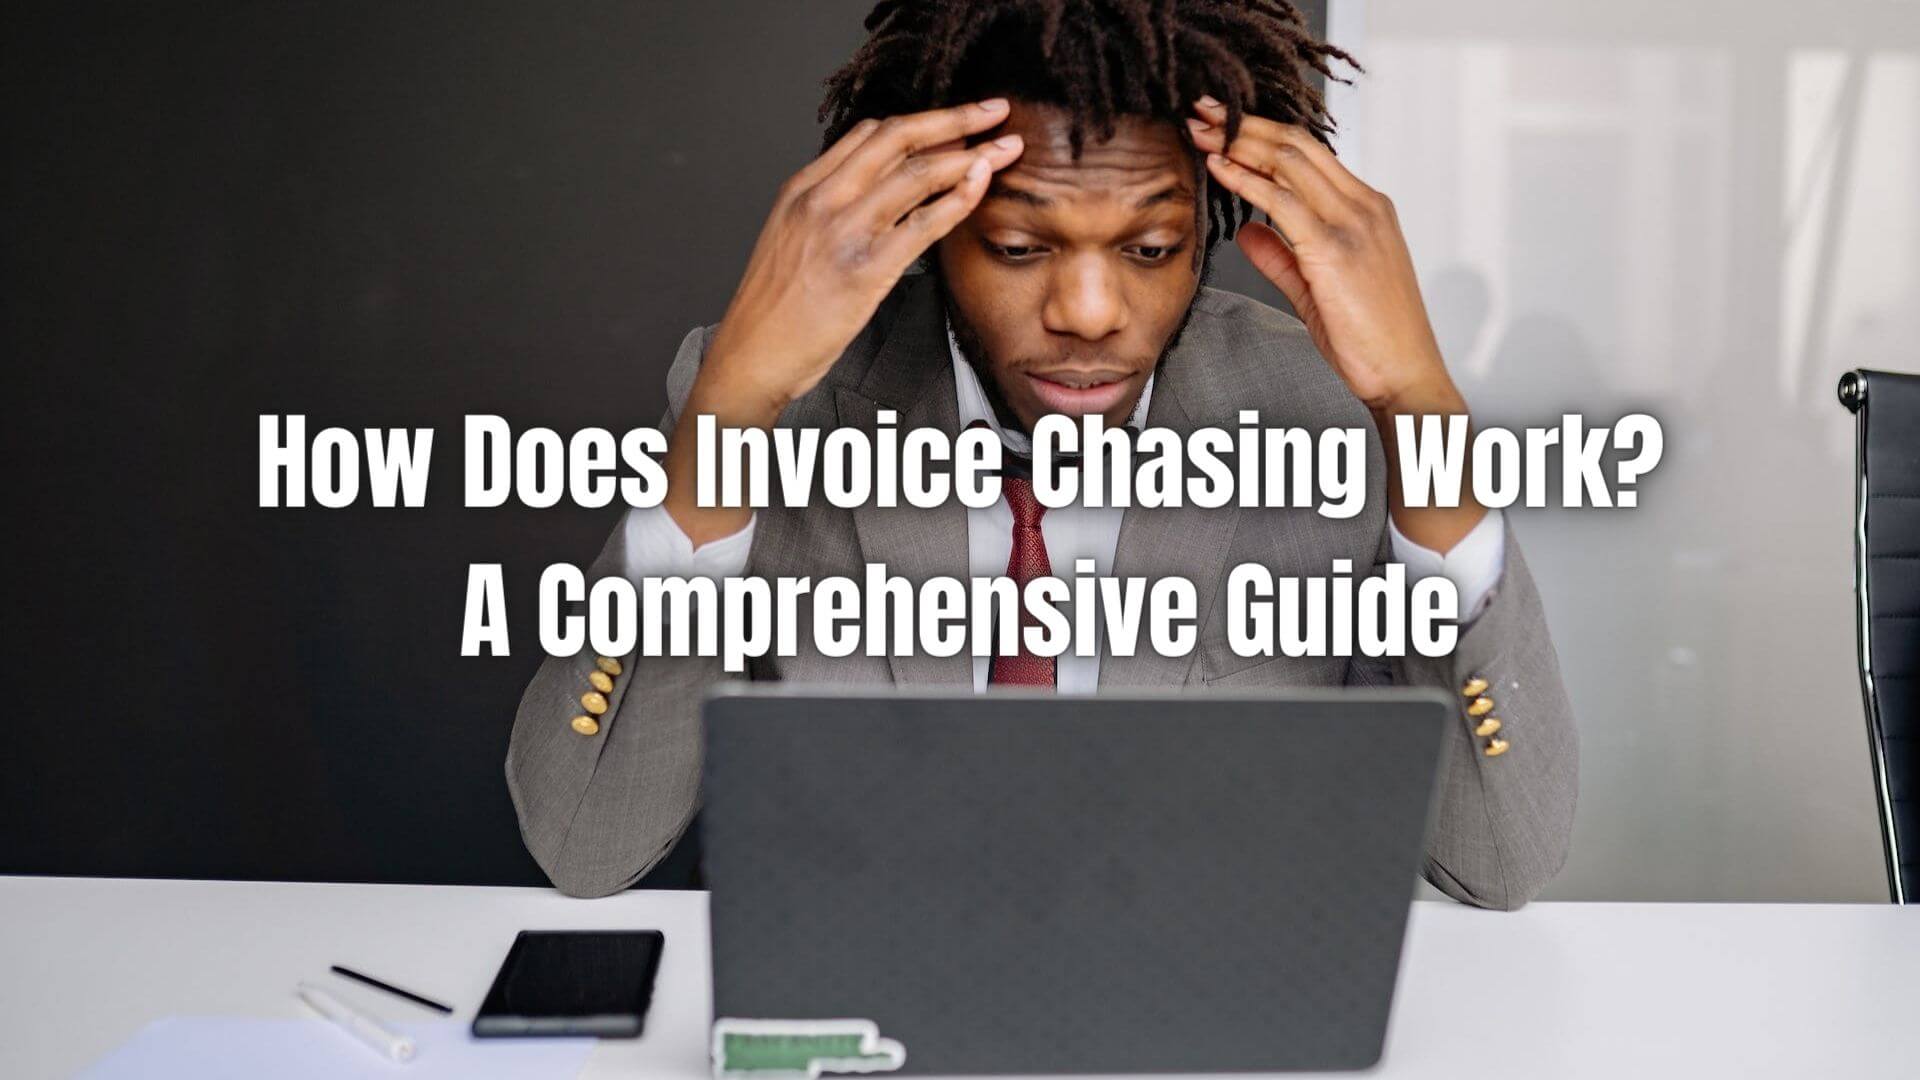 Invoice Chasing is an automated method designed to streamline the process of pursuing overdue payments. Click here to learn more!